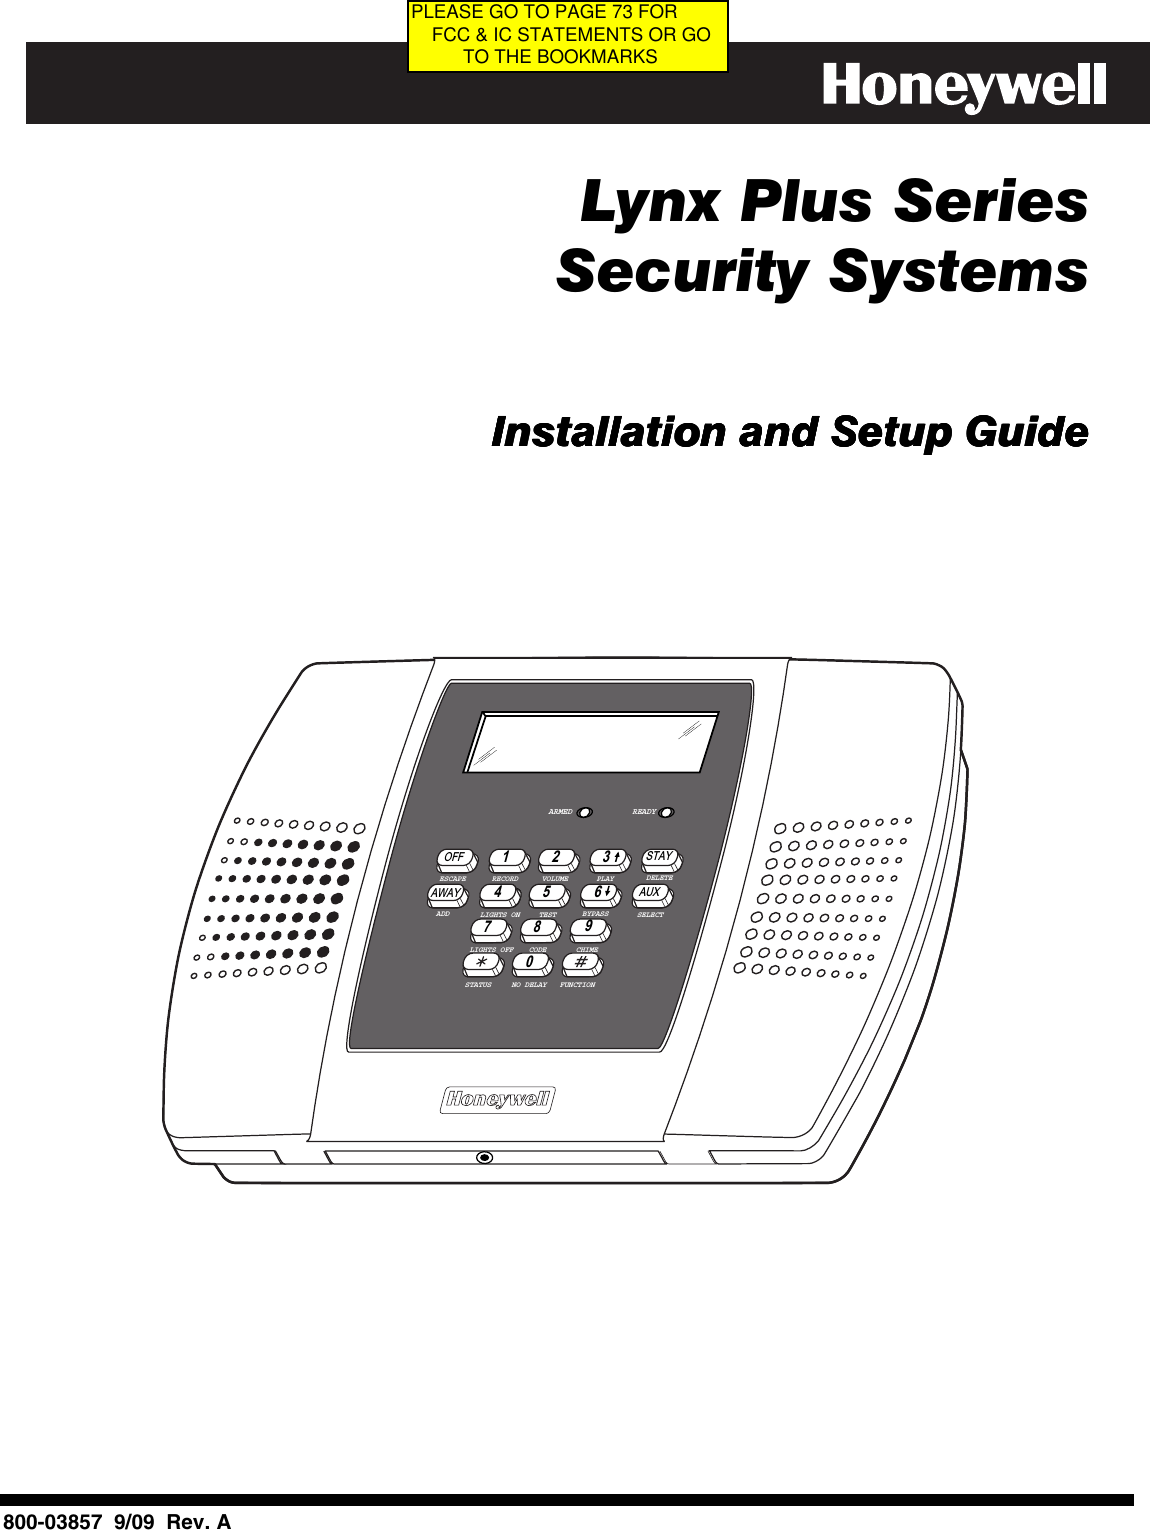   Lynx Plus Series   Security Systems         Installation and Setup GuideInstallation and Setup GuideInstallation and Setup GuideInstallation and Setup Guide                    BYPASSNO DELAYRECORDTESTFUNCTIONSTATUSVOLUME PLAYCODELIGHTS ONLIGHTS OFF CHIMEESCAPEADDDELETESELECTOFF STAY132AWAY AUX4 65ARMED READY7980                             800-03857  9/09  Rev. APLEASE GO TO PAGE 73 FOR     FCC &amp; IC STATEMENTS OR GO           TO THE BOOKMARKS